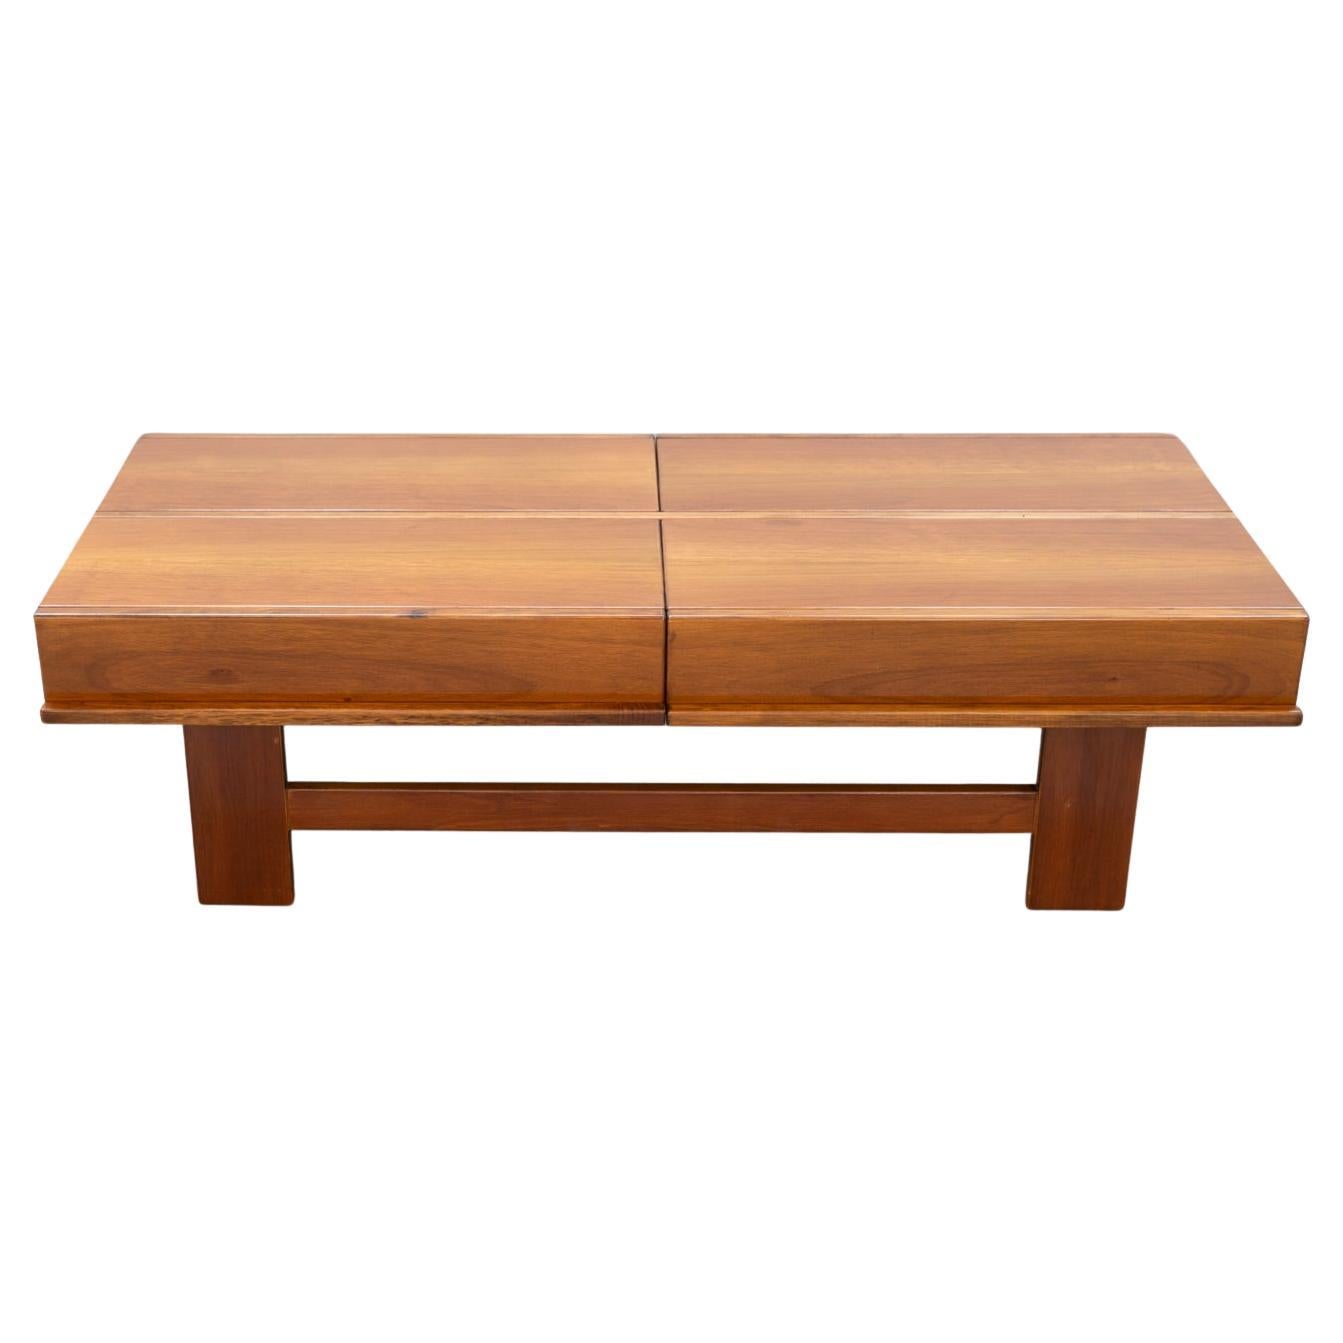 Walnut coffee table with compartment by Michelucci, 1970 For Sale